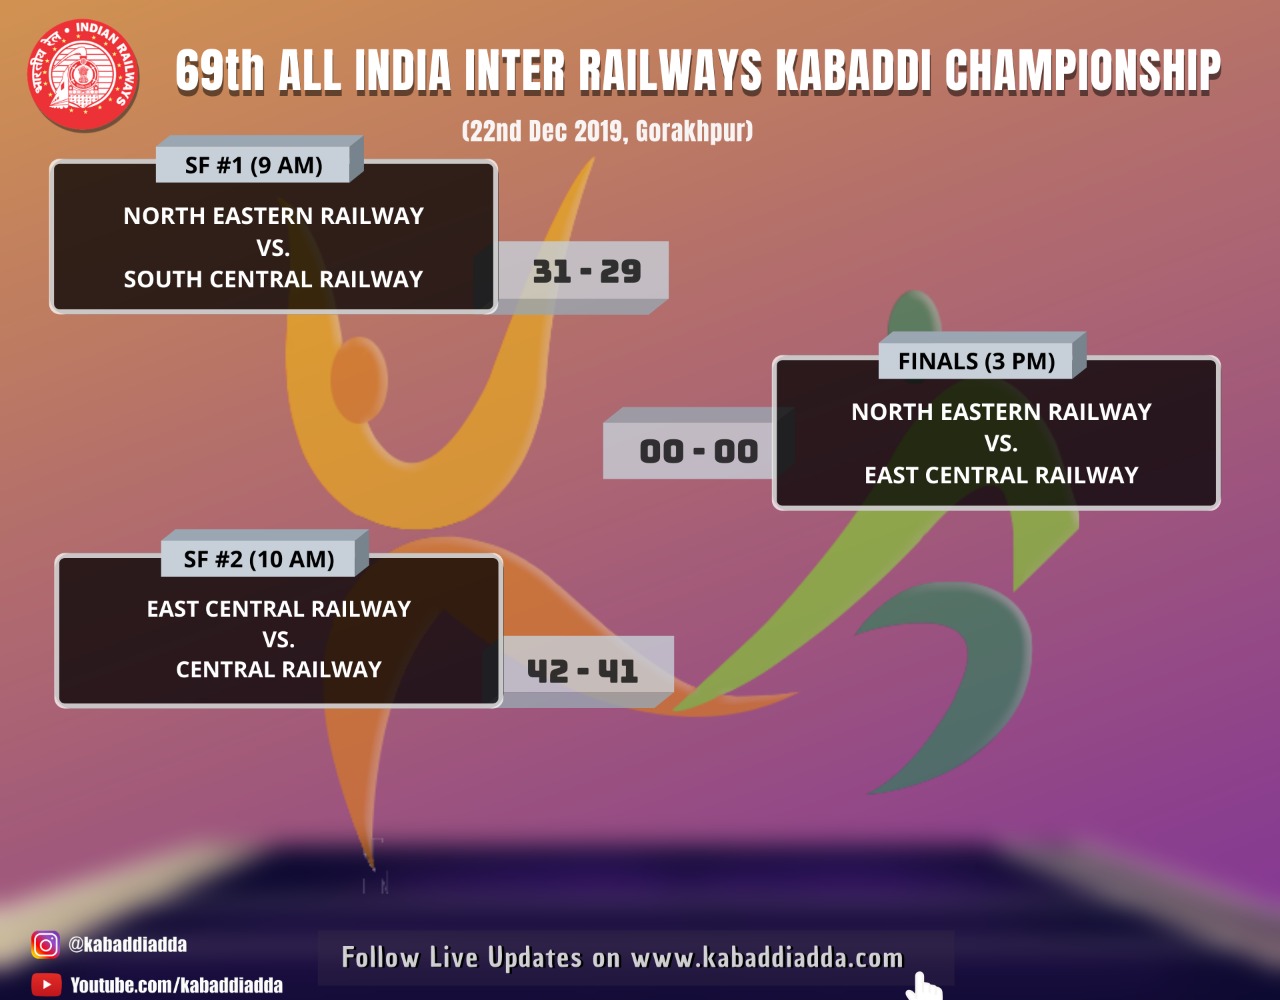 Finals schedule and Semifinals schedule for All India Railways Tournament 2019